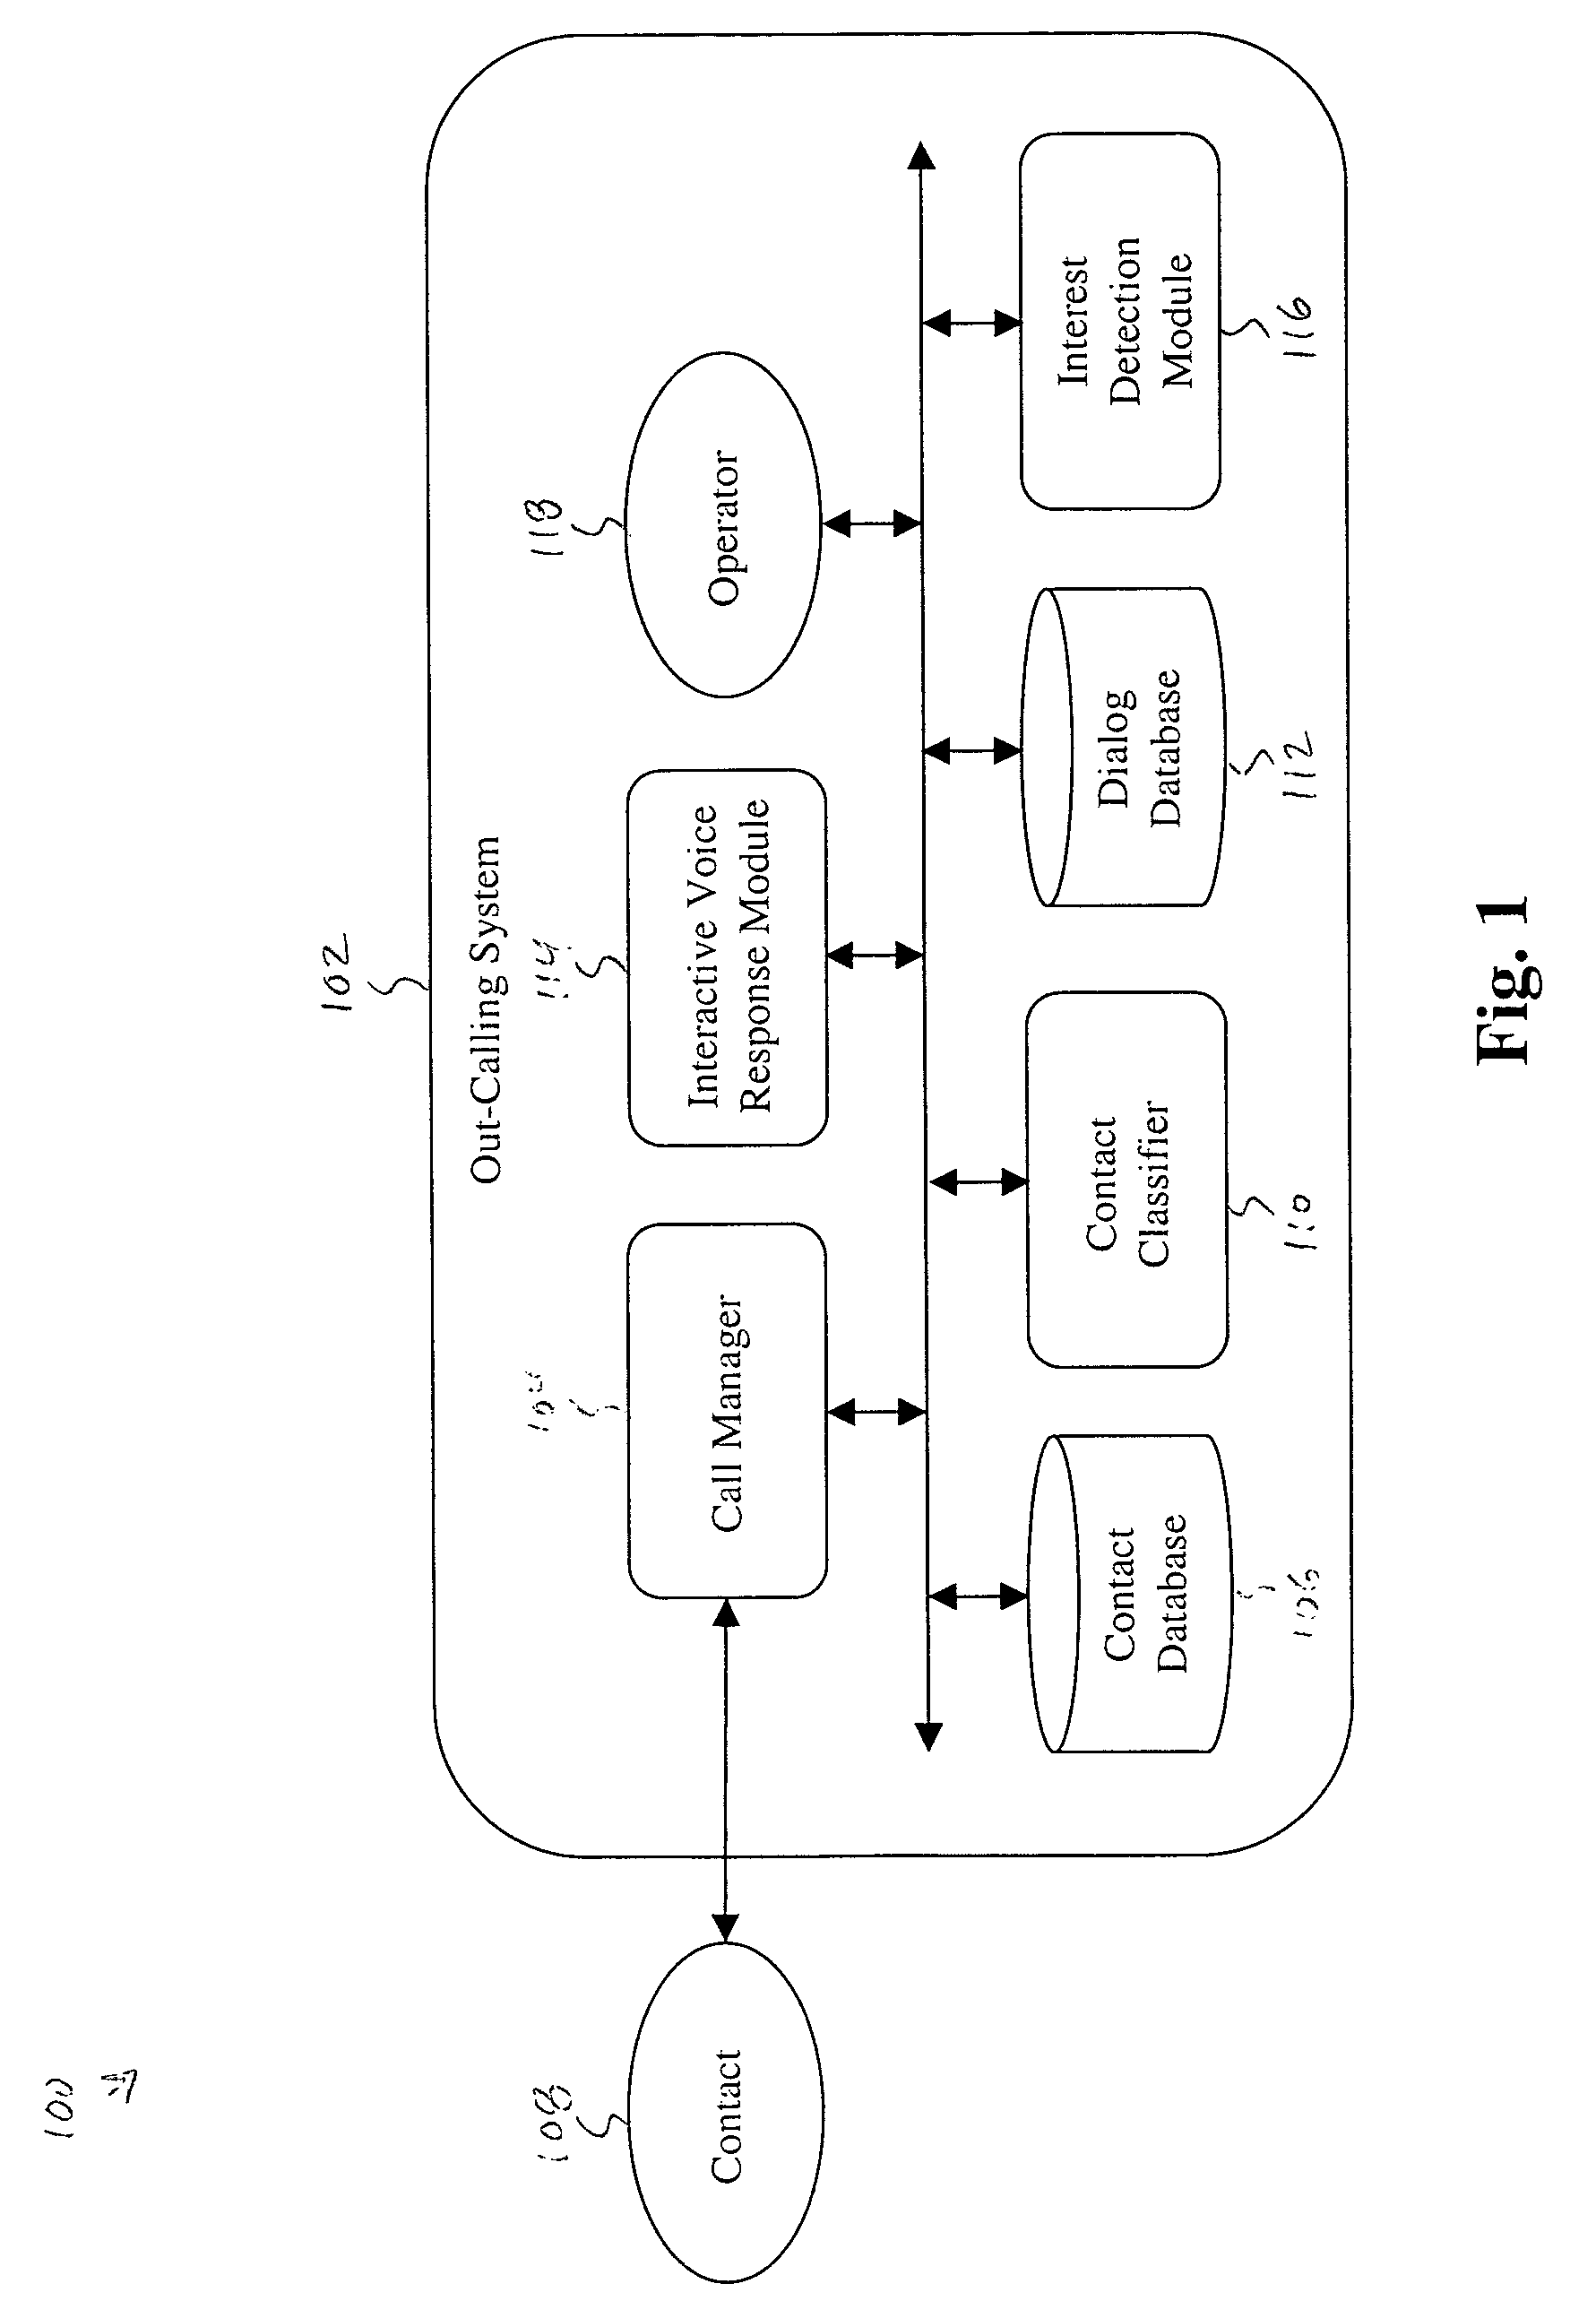 System and method for interactive voice response enhanced out-calling